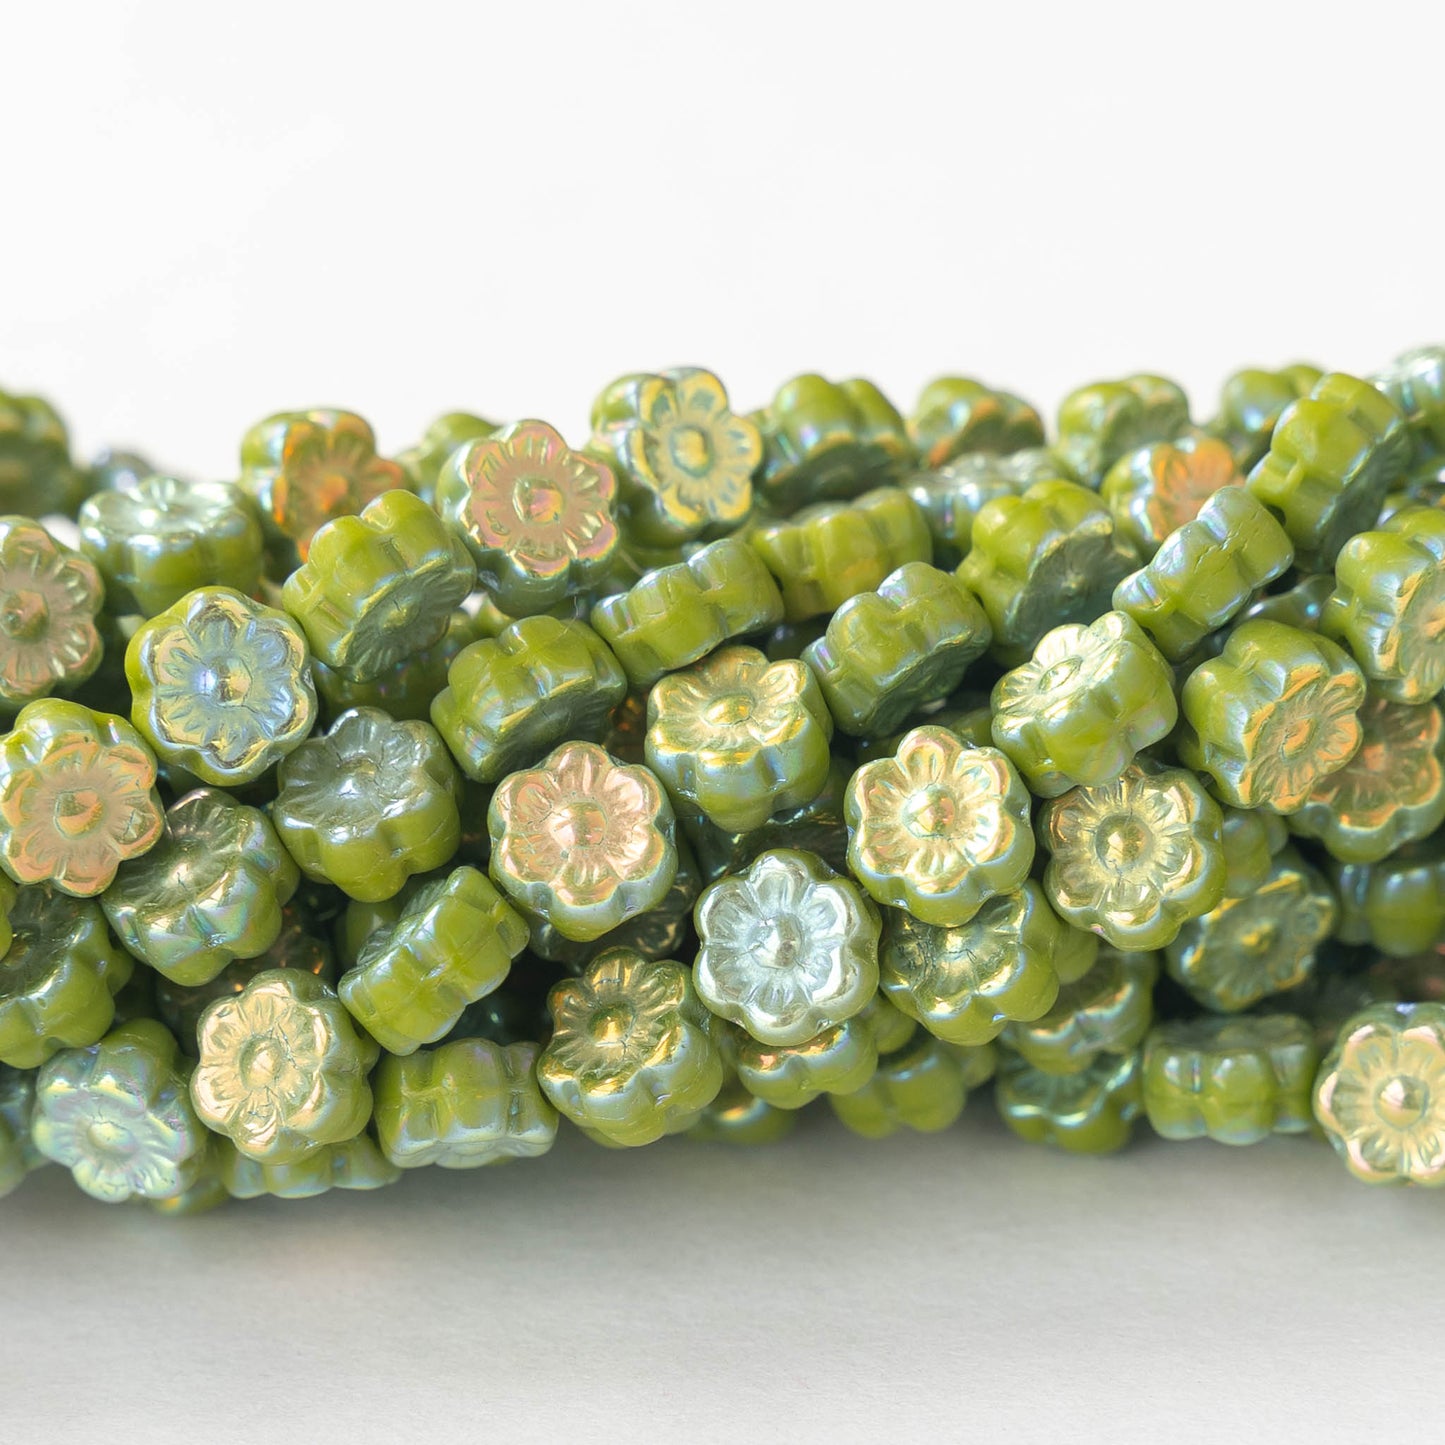 8mm Glass Flower Beads - Opaque Green AB Luster - 30 beads